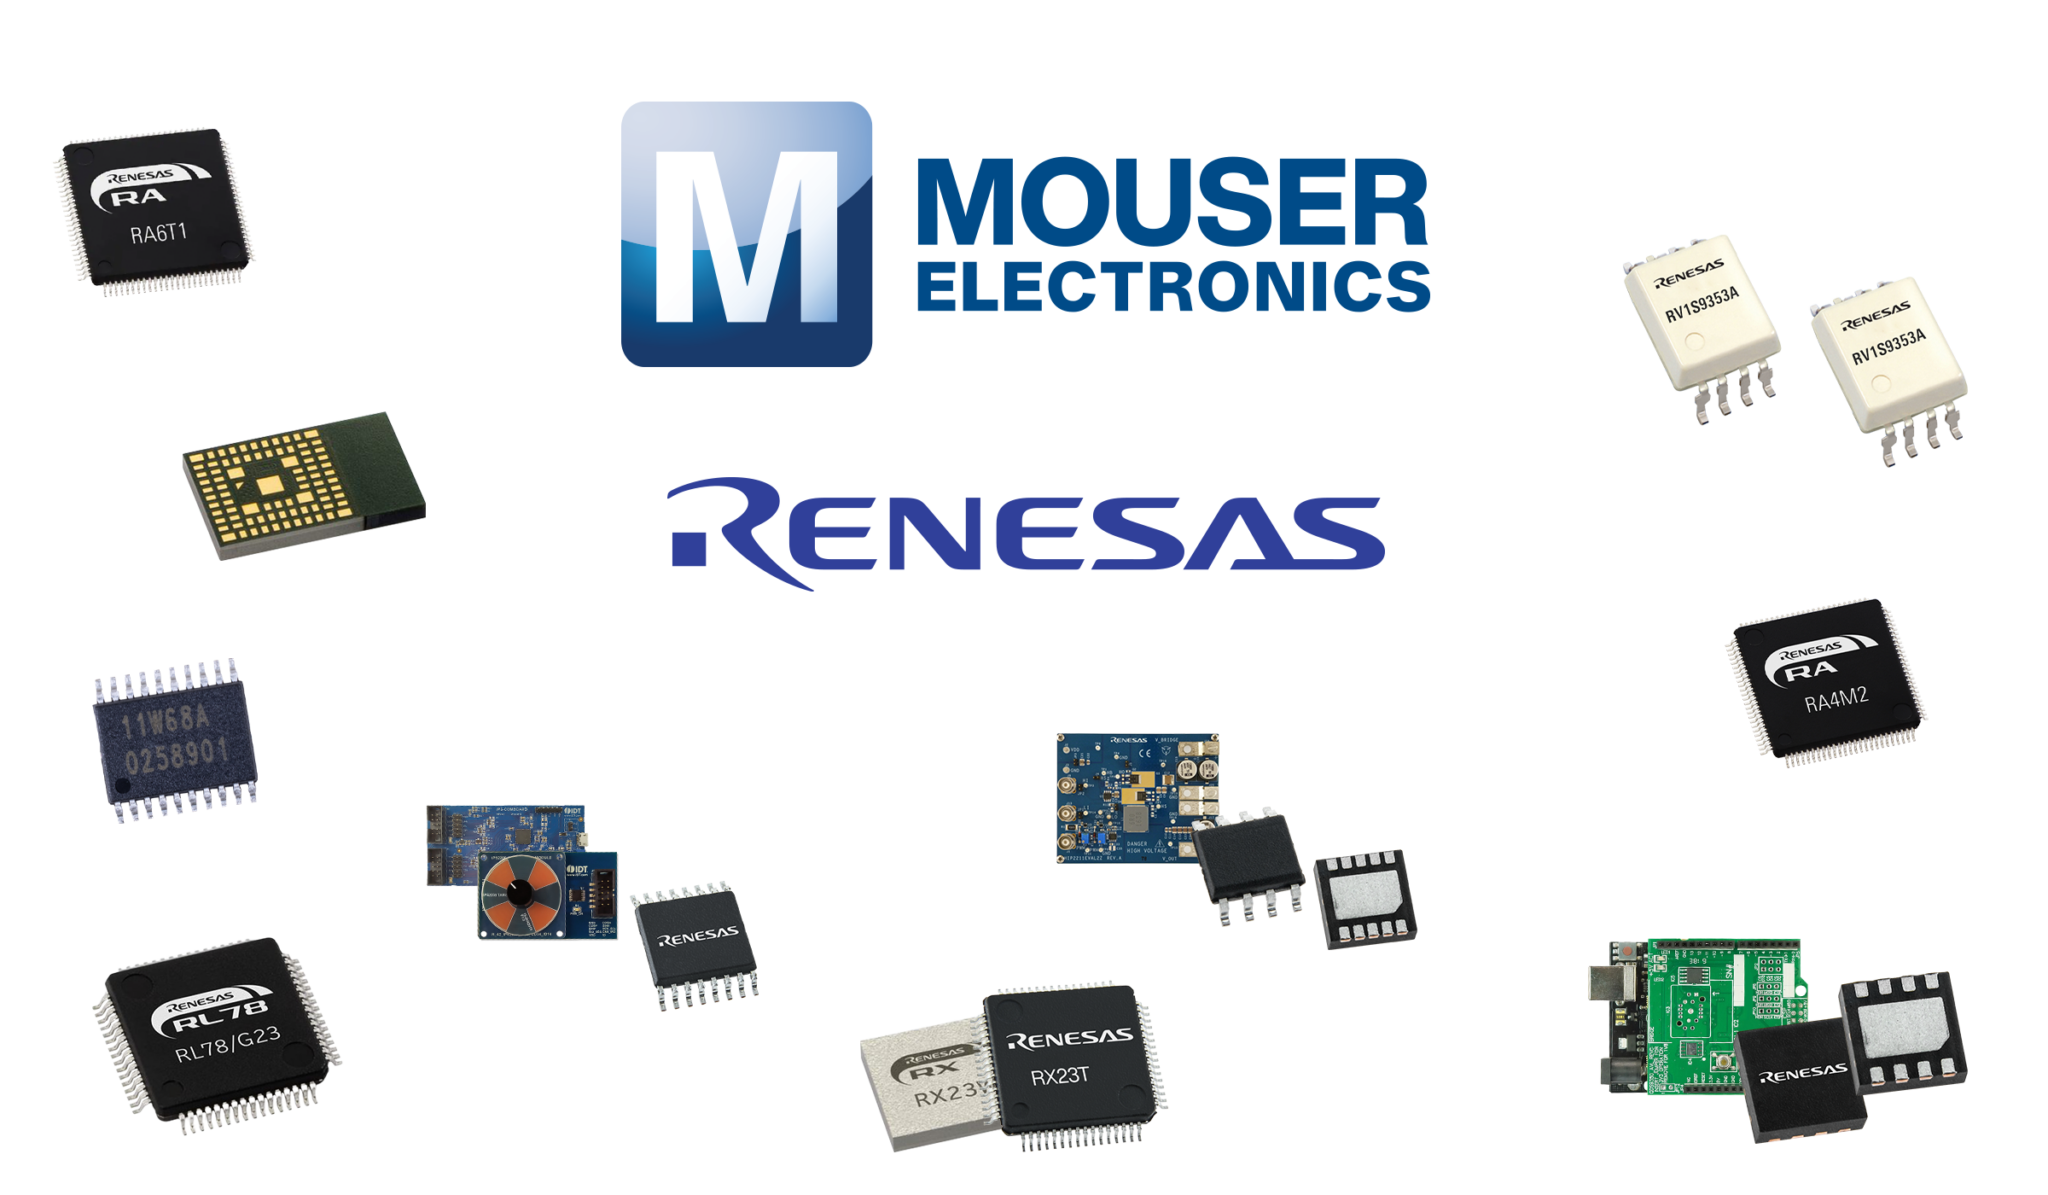 Electronic Components Distributor - Mouser Electronics